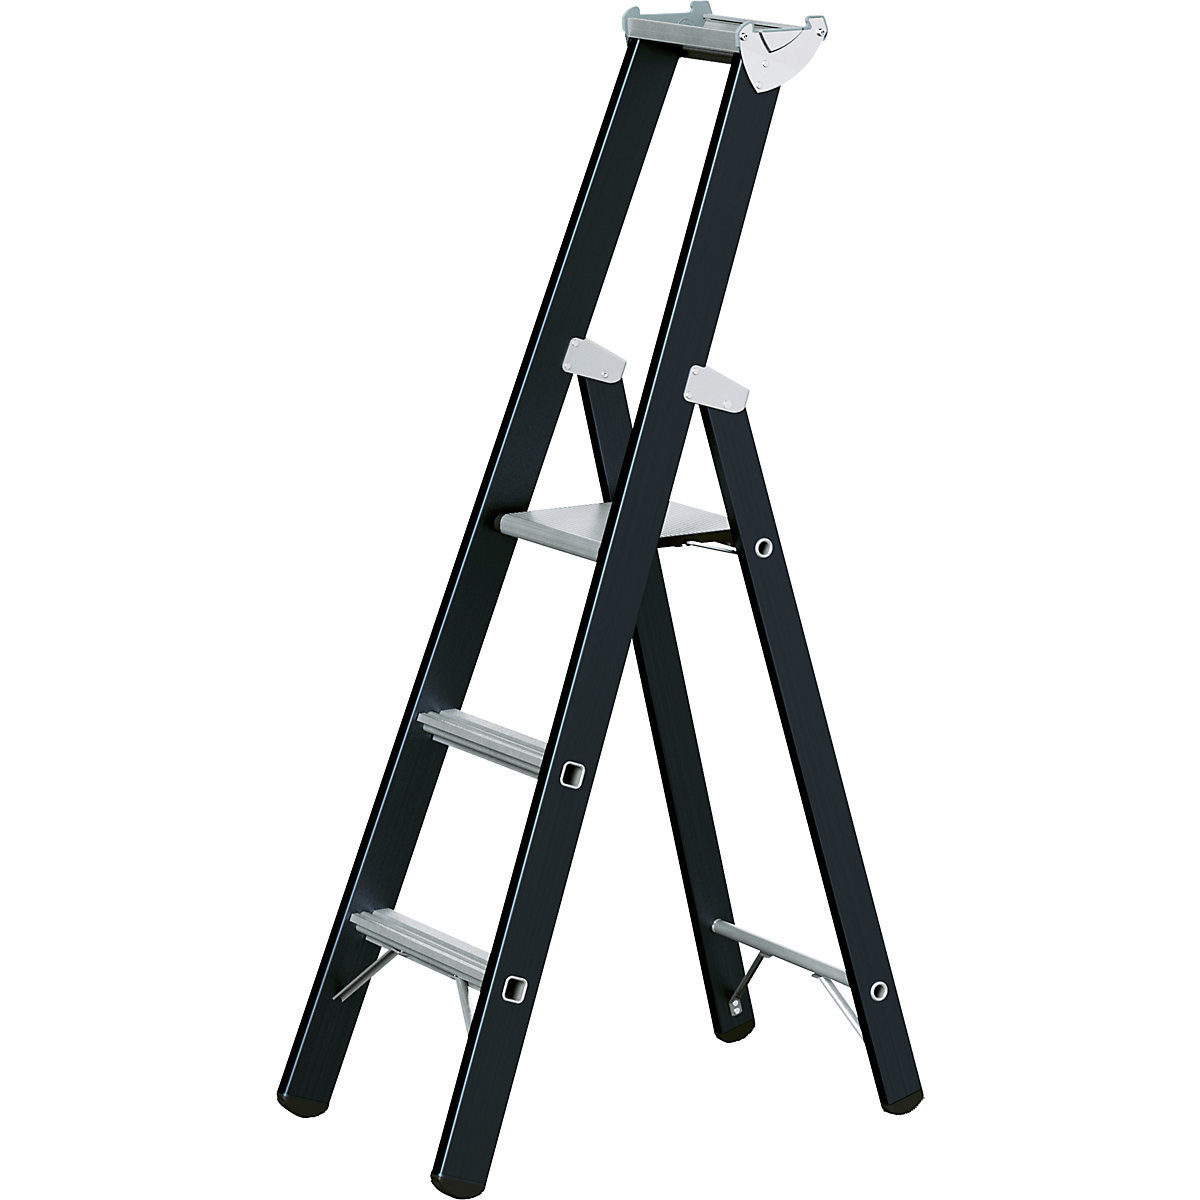 Heavy duty step ladder - ZARGES